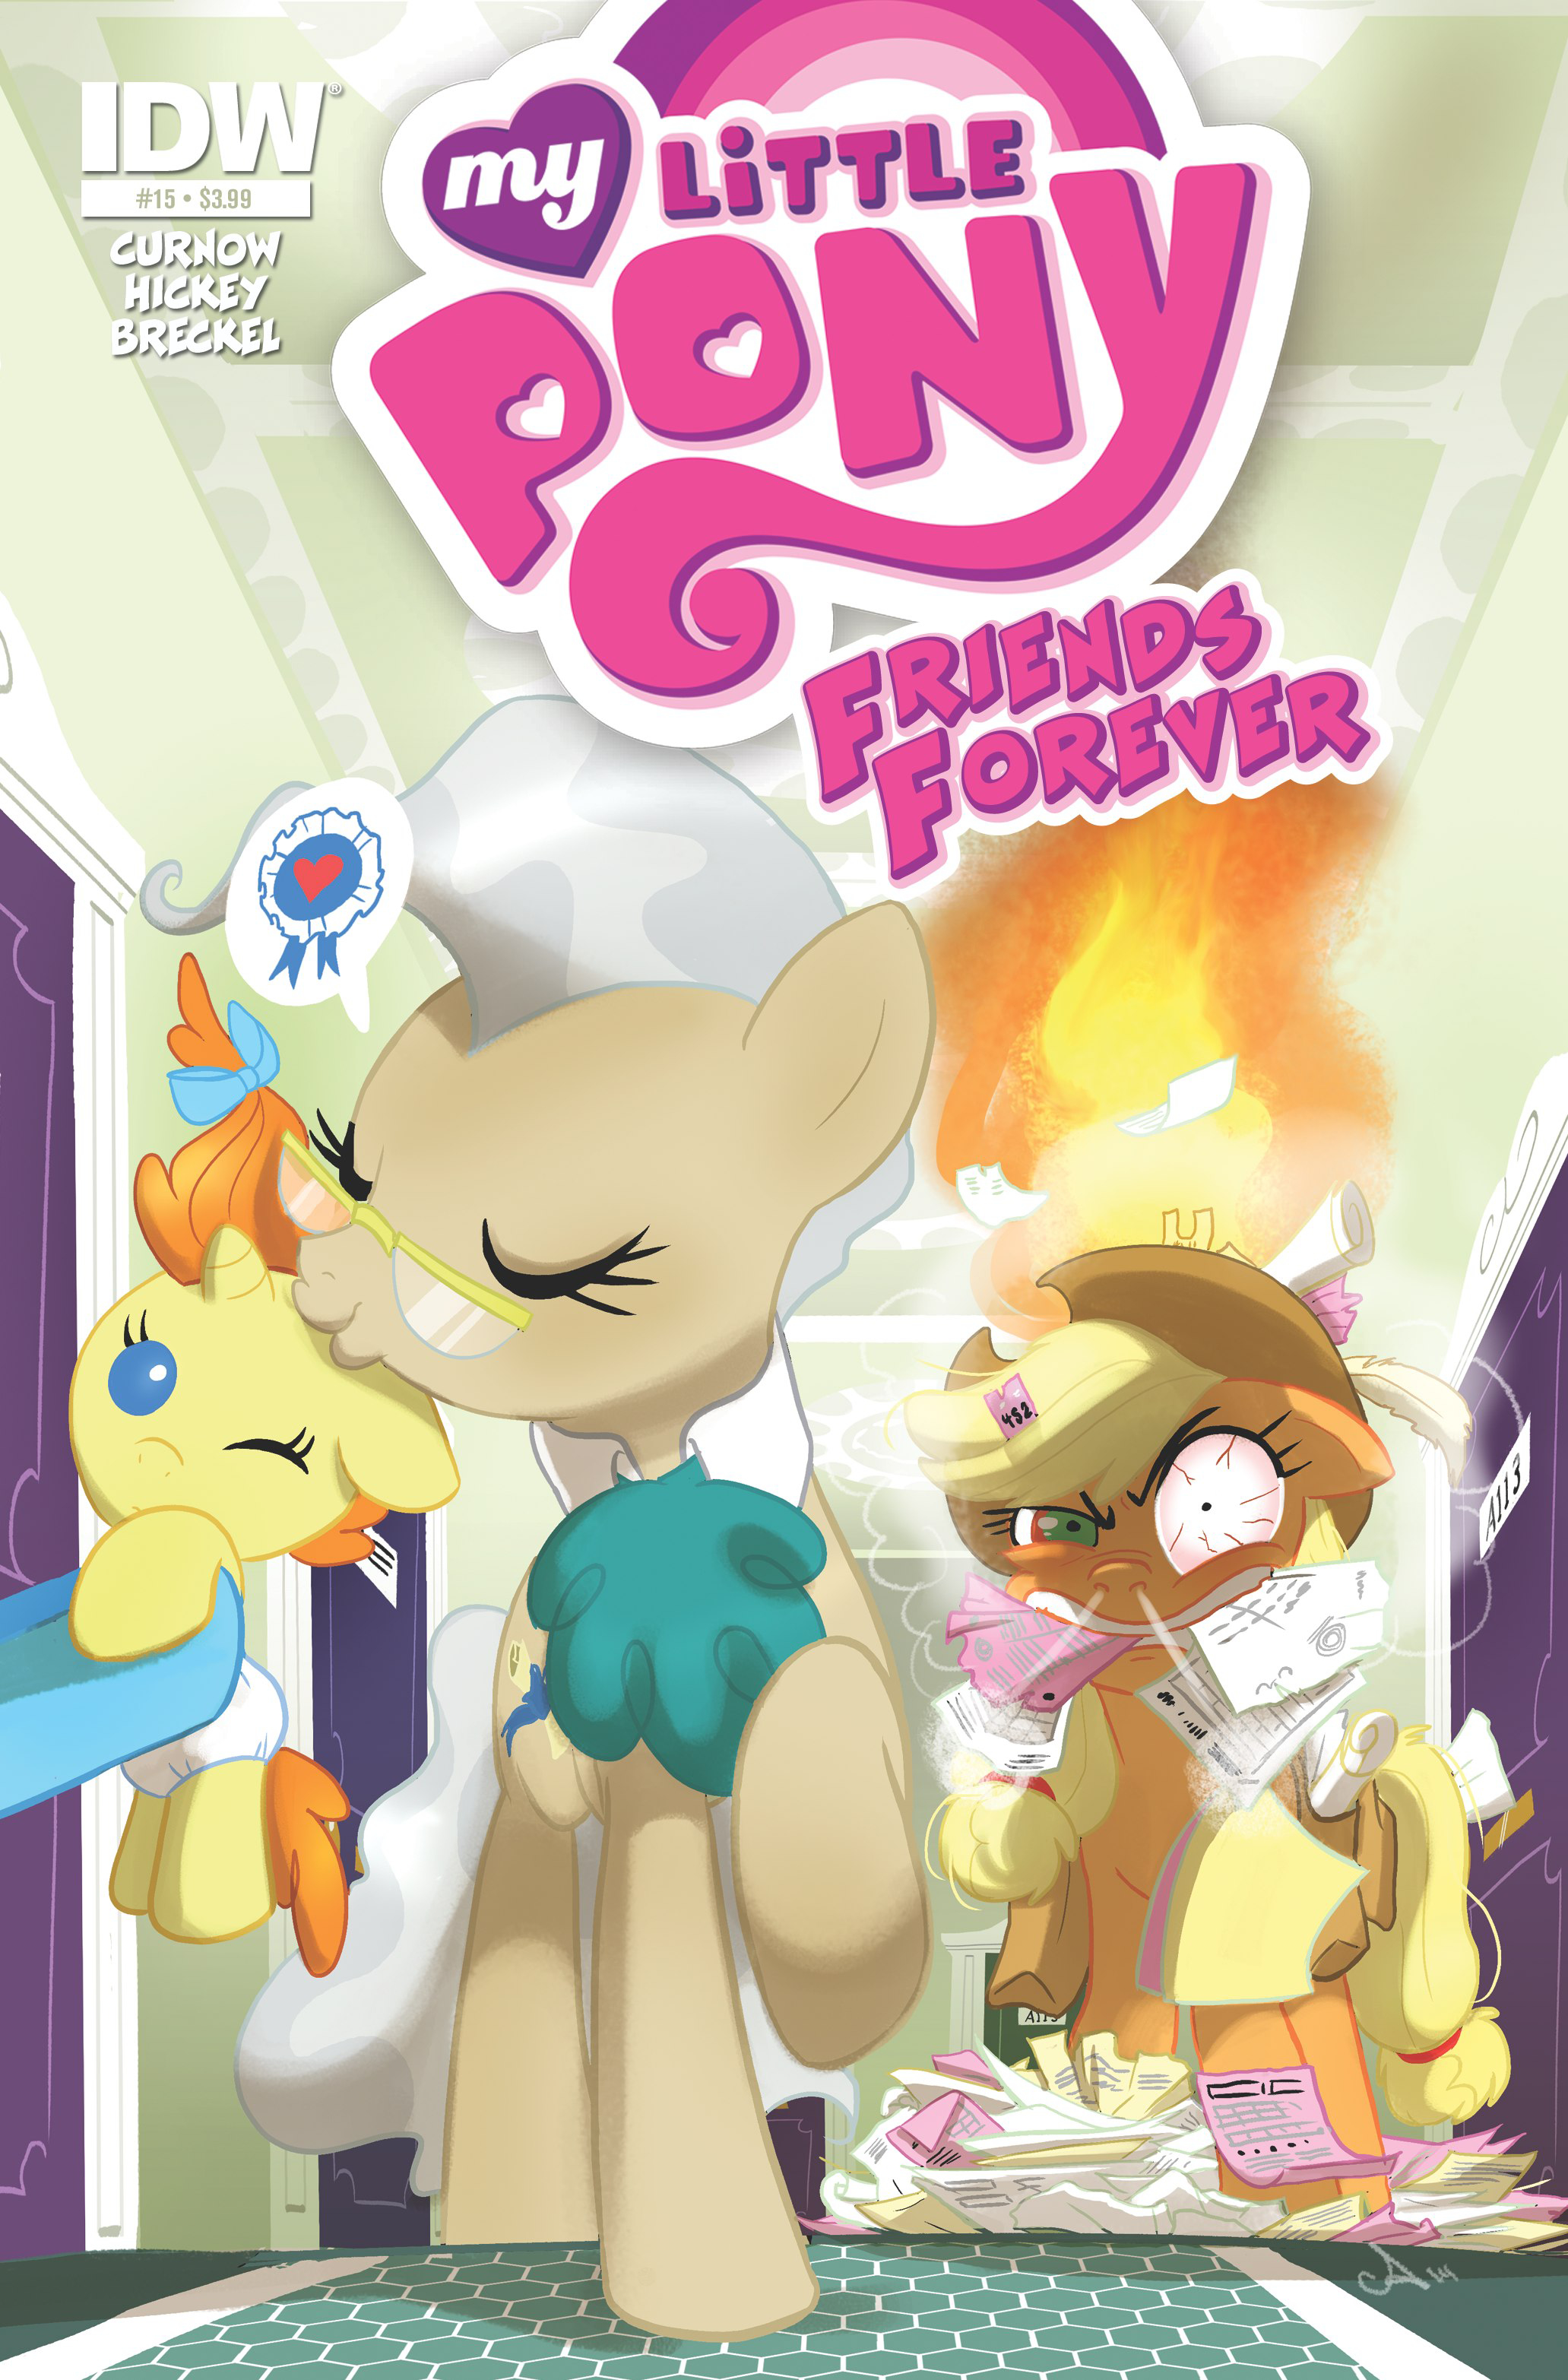 MY LITTLE PONY FRIENDS FOREVER #15